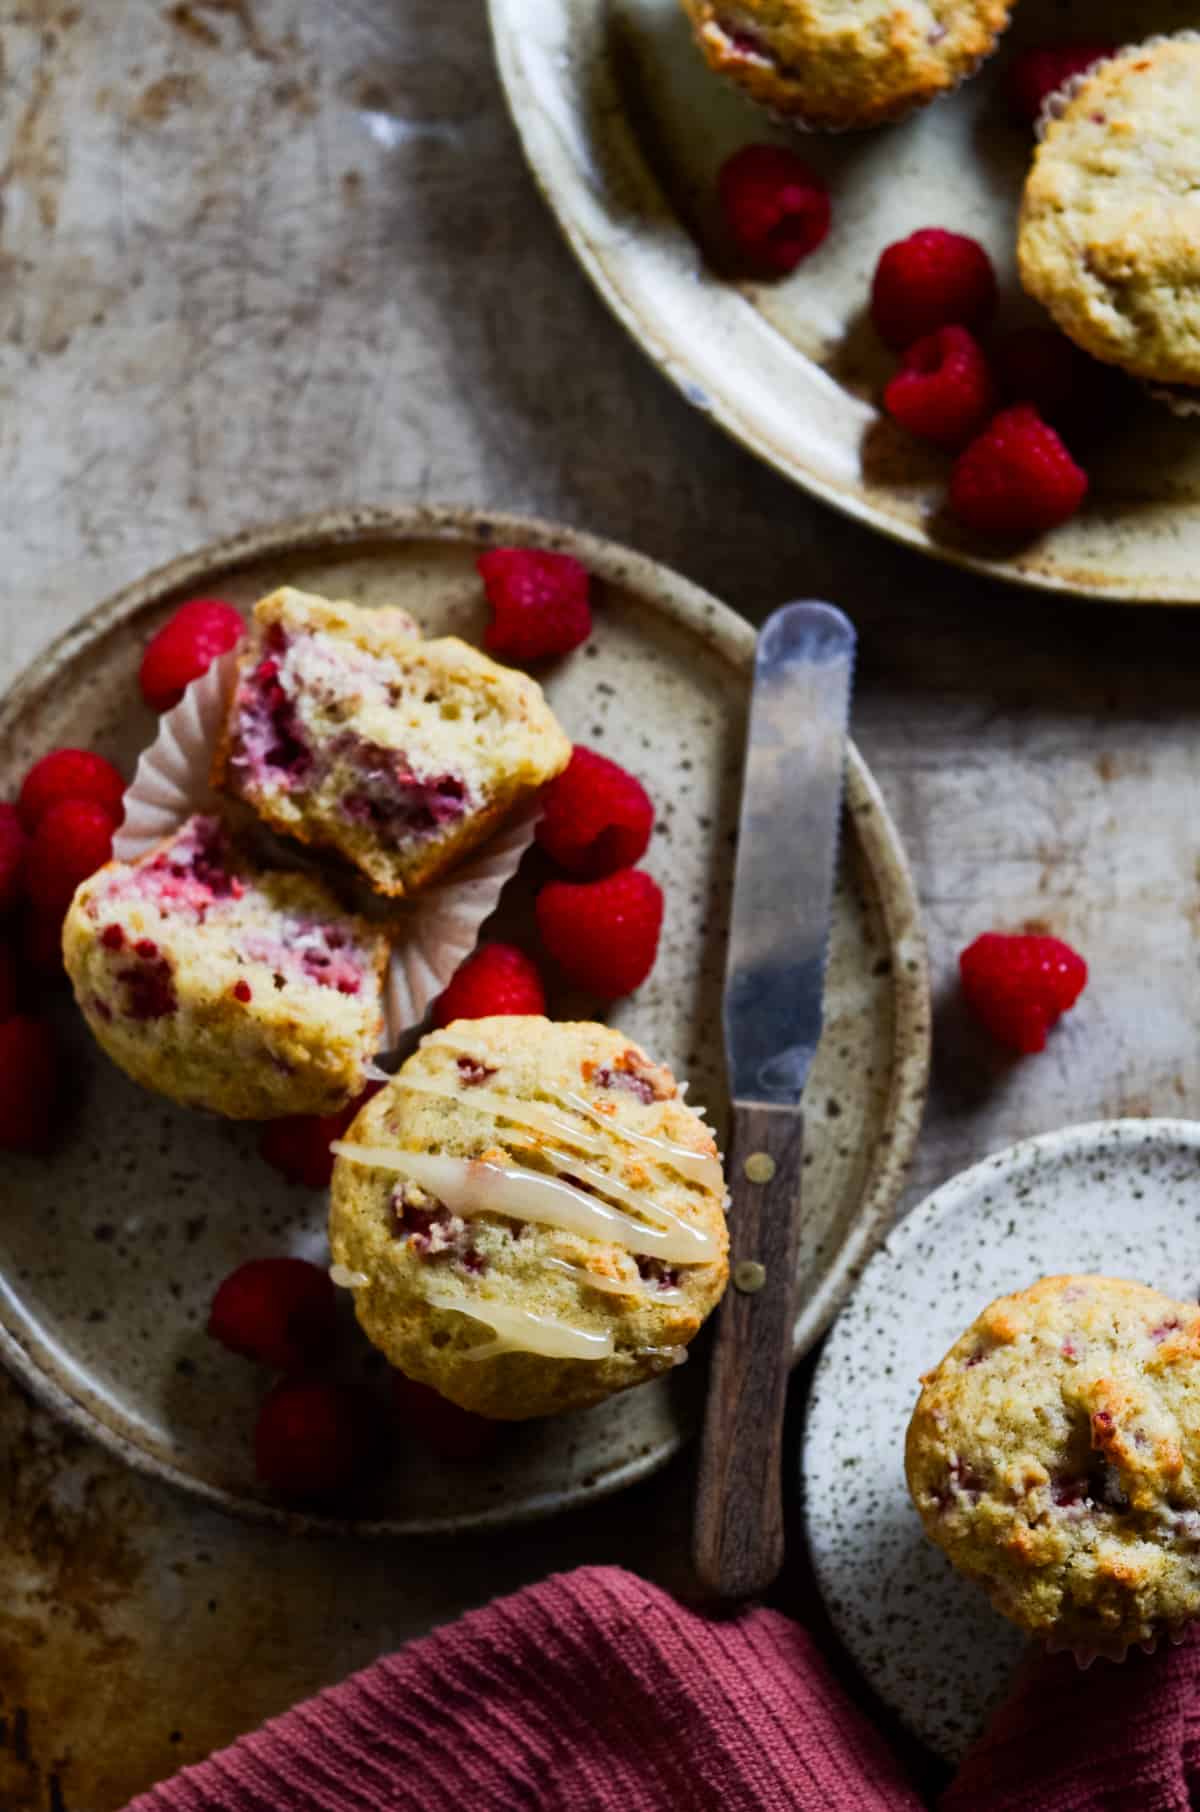 Raspberry muffins on plates with fresh raspberries and a knife.